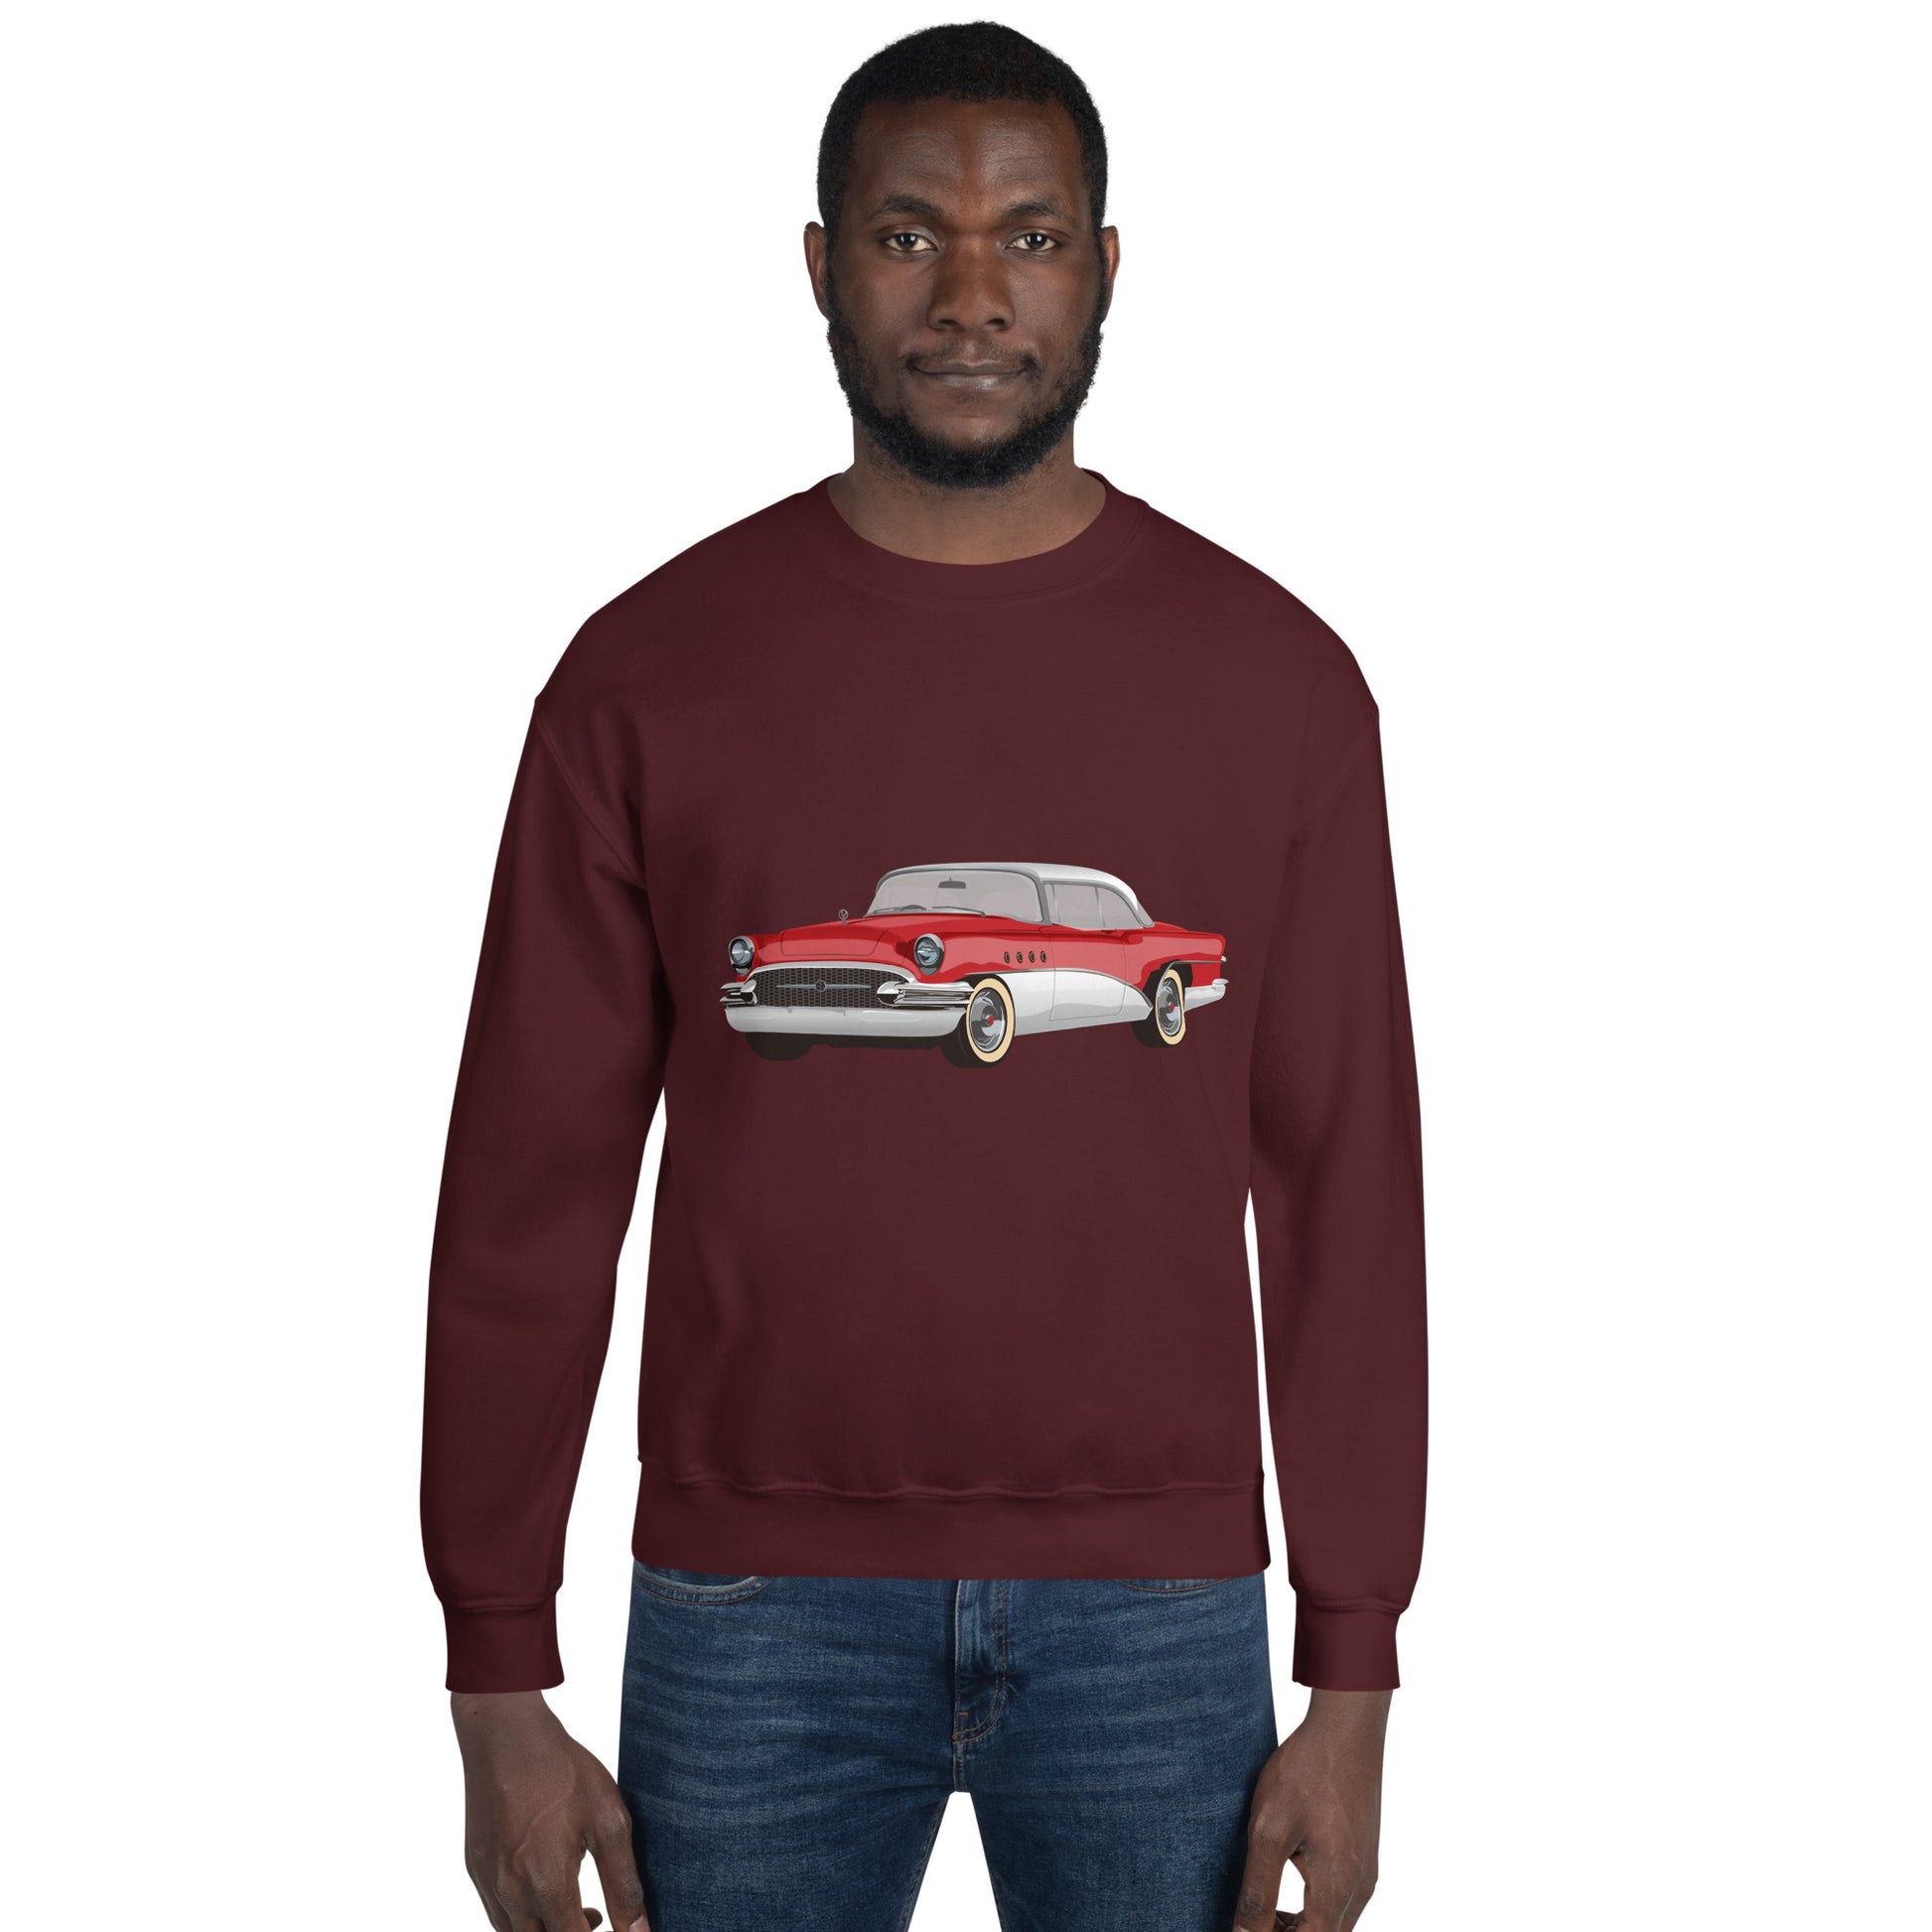 Man with maroon sweatshirt with red chevrolet